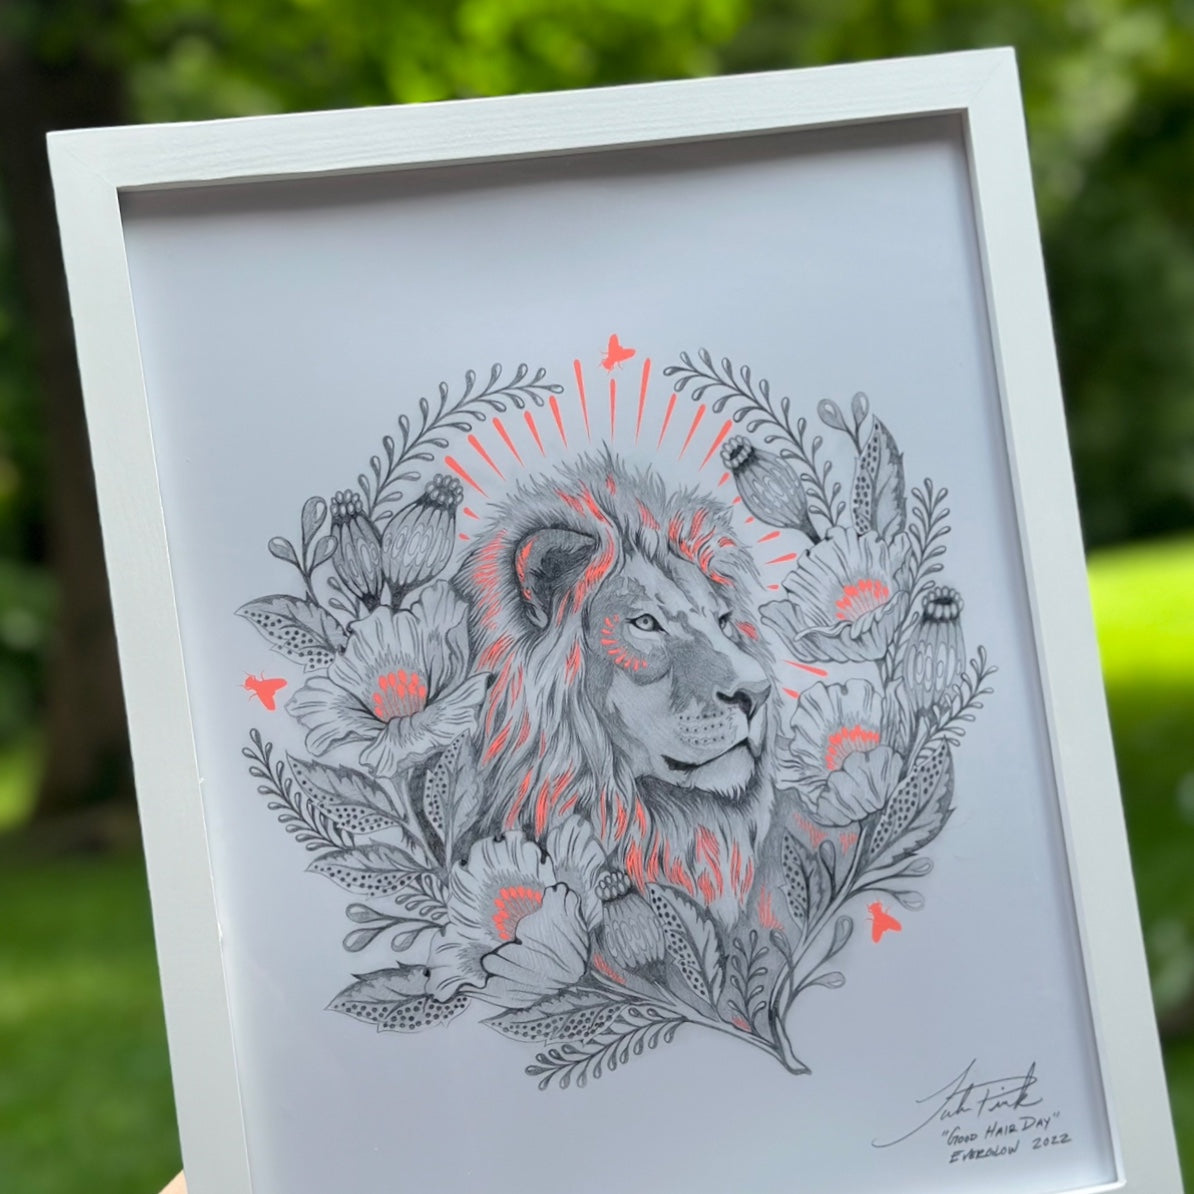 Single Everglow Art Prints - A #VeryRare Tula Pink Special Product!